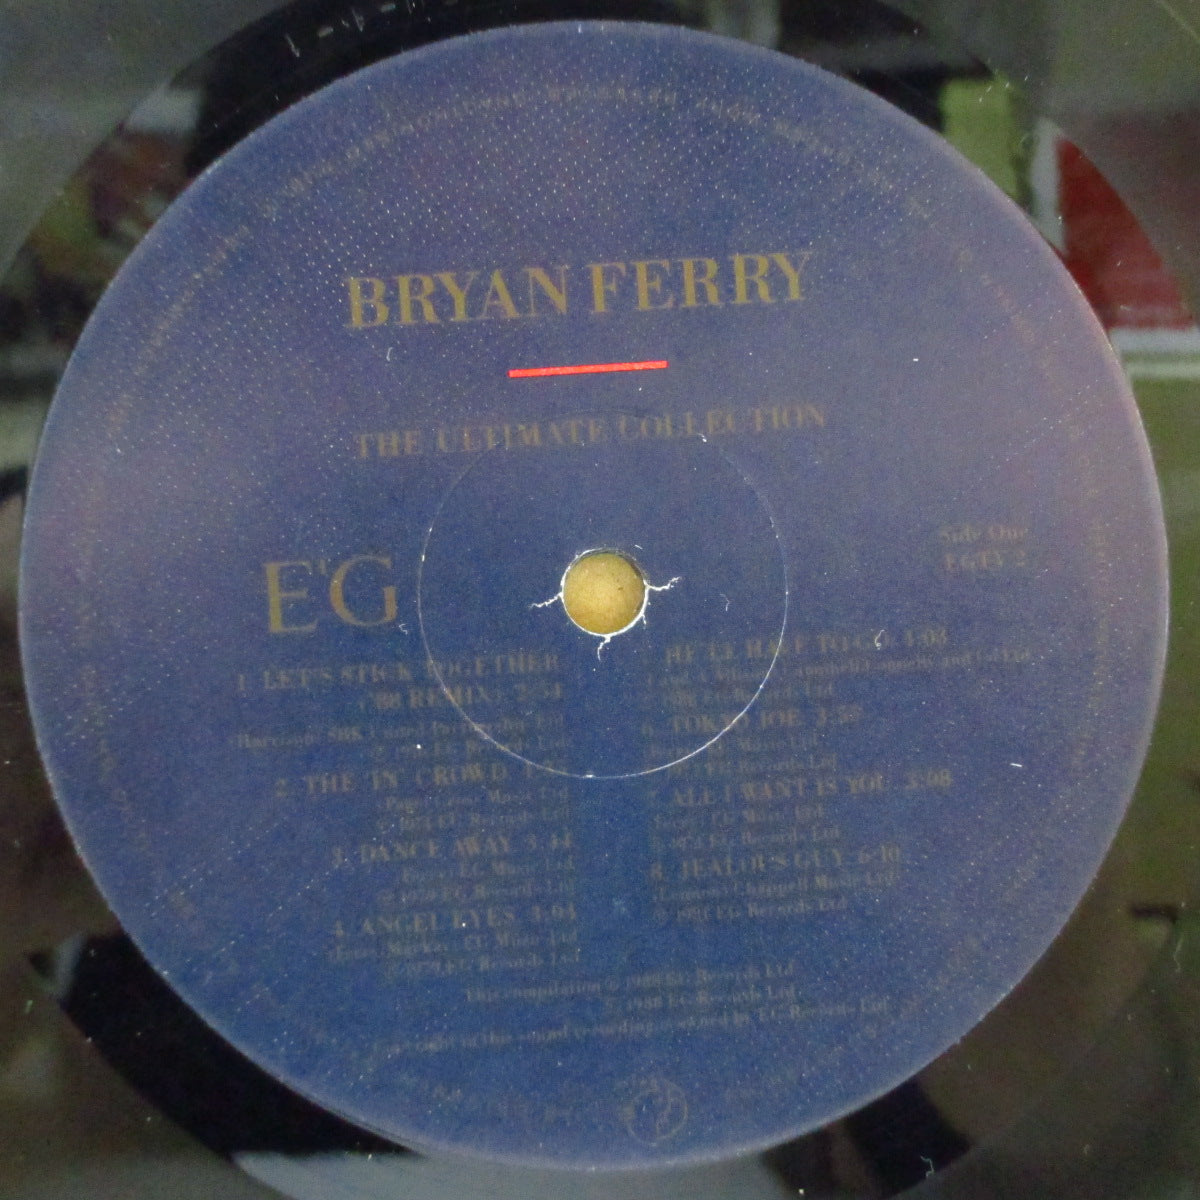 BRYAN FERRY (ブライアン・フェリー) - The Ultimate Collection With Roxy Music (UK